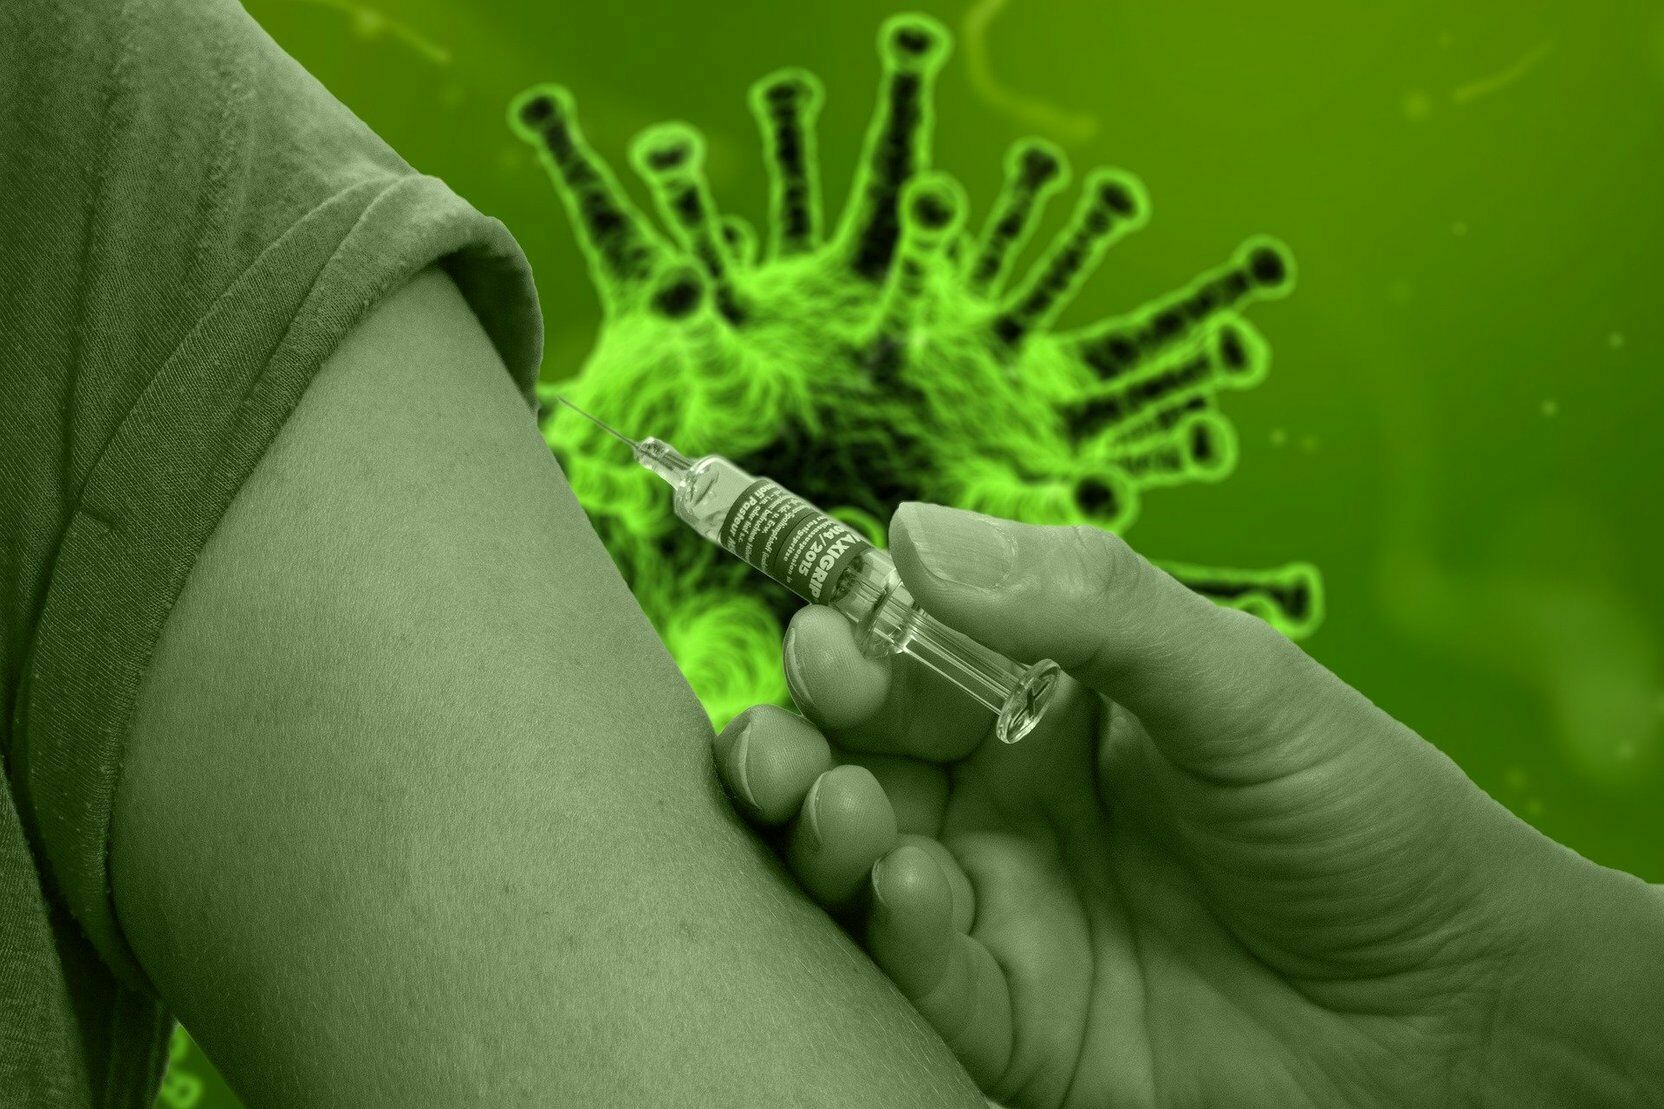 Experts consider the vaccine against covid more dangerous than the disease itself